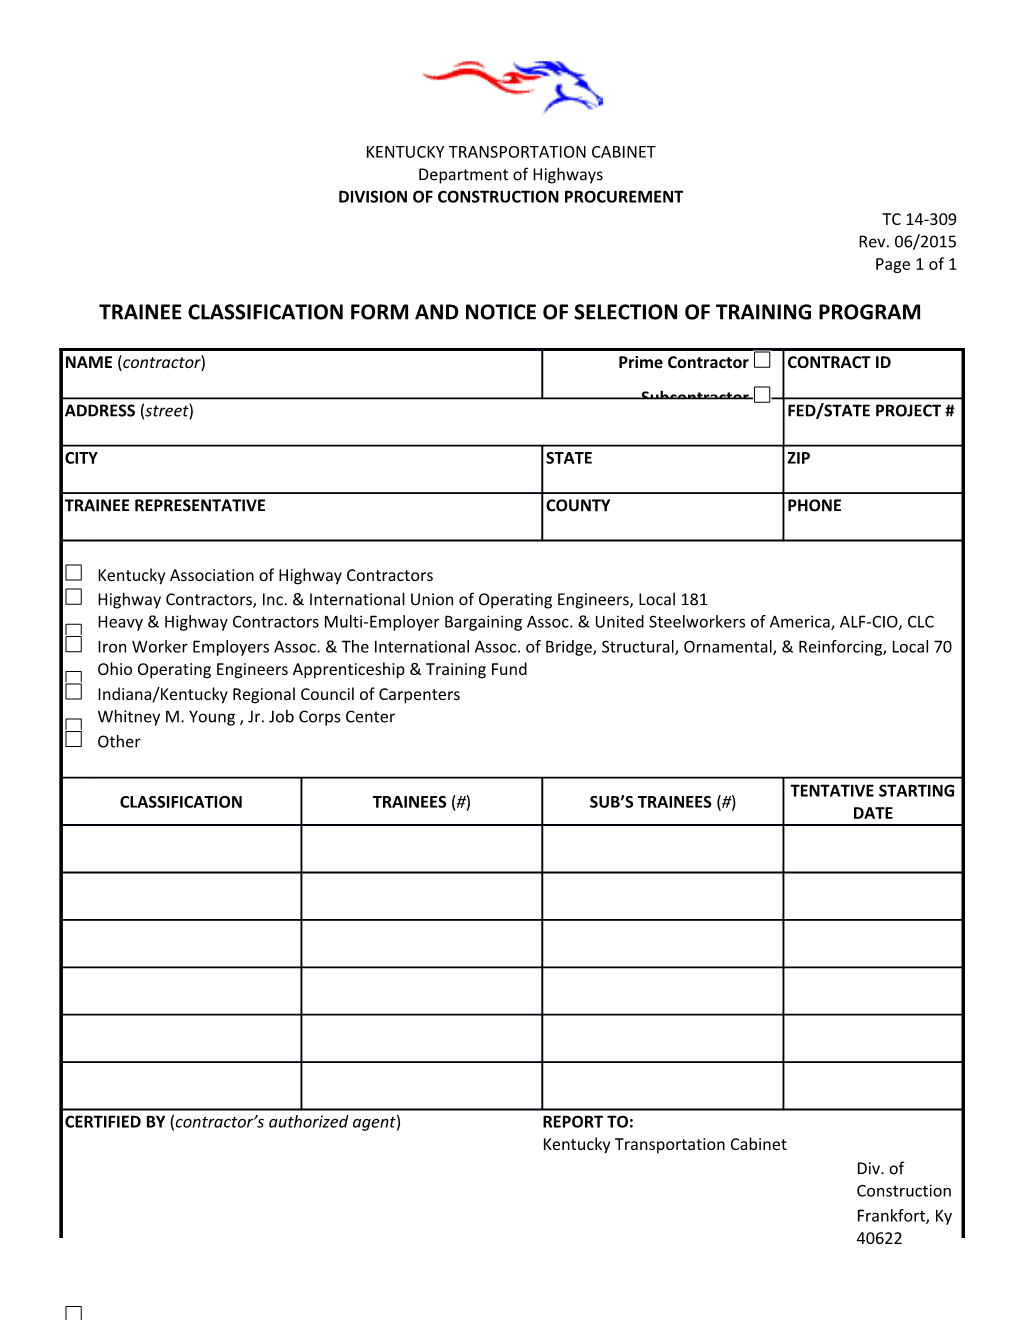 Trainee Classification Form and Notice of Selection of Training Program